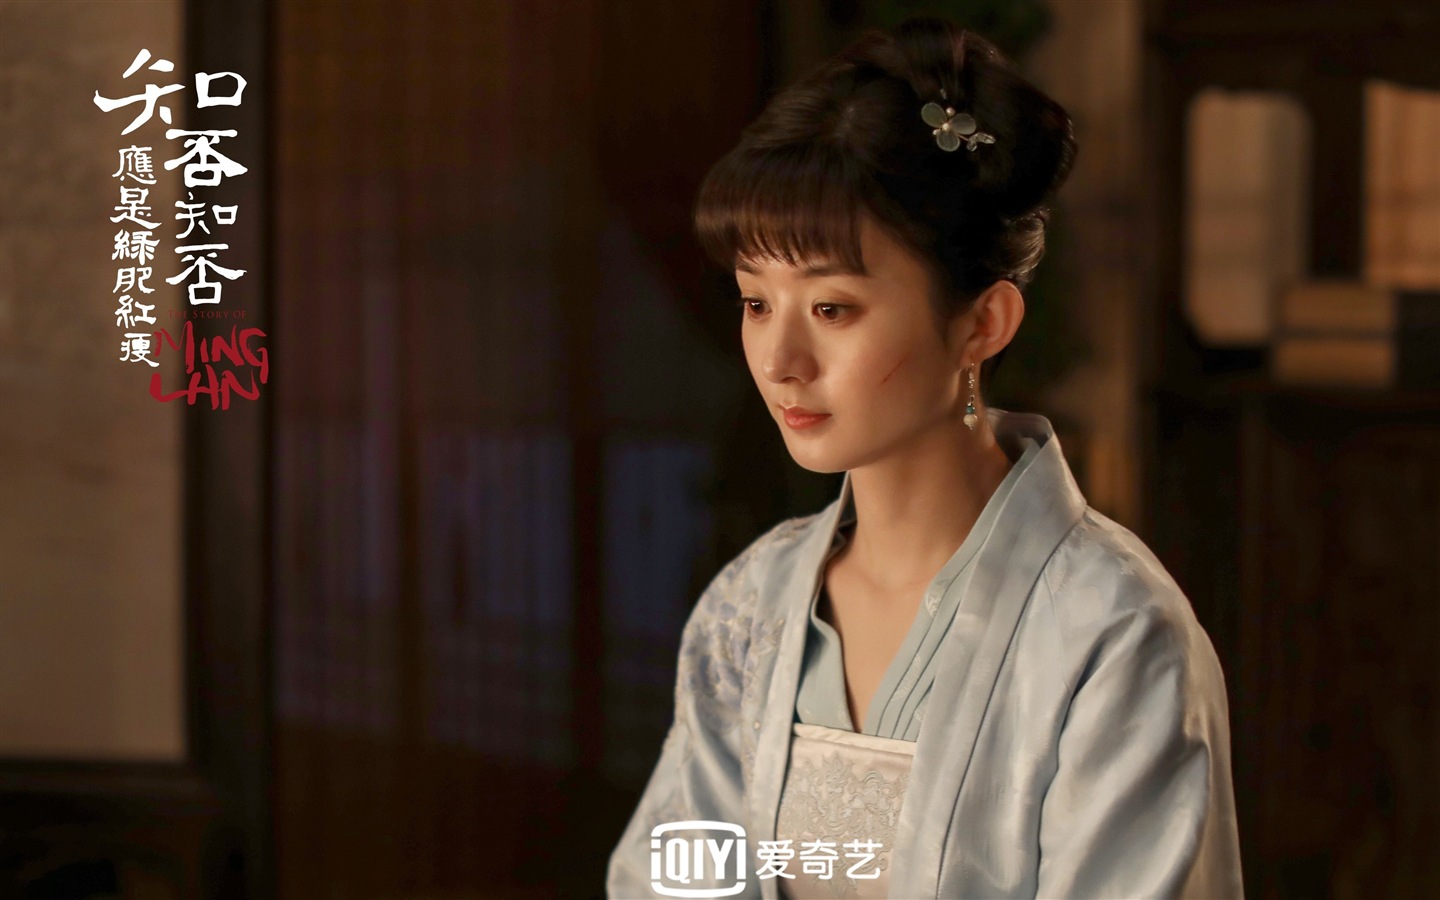 The Story Of MingLan, TV series HD wallpapers #36 - 1440x900